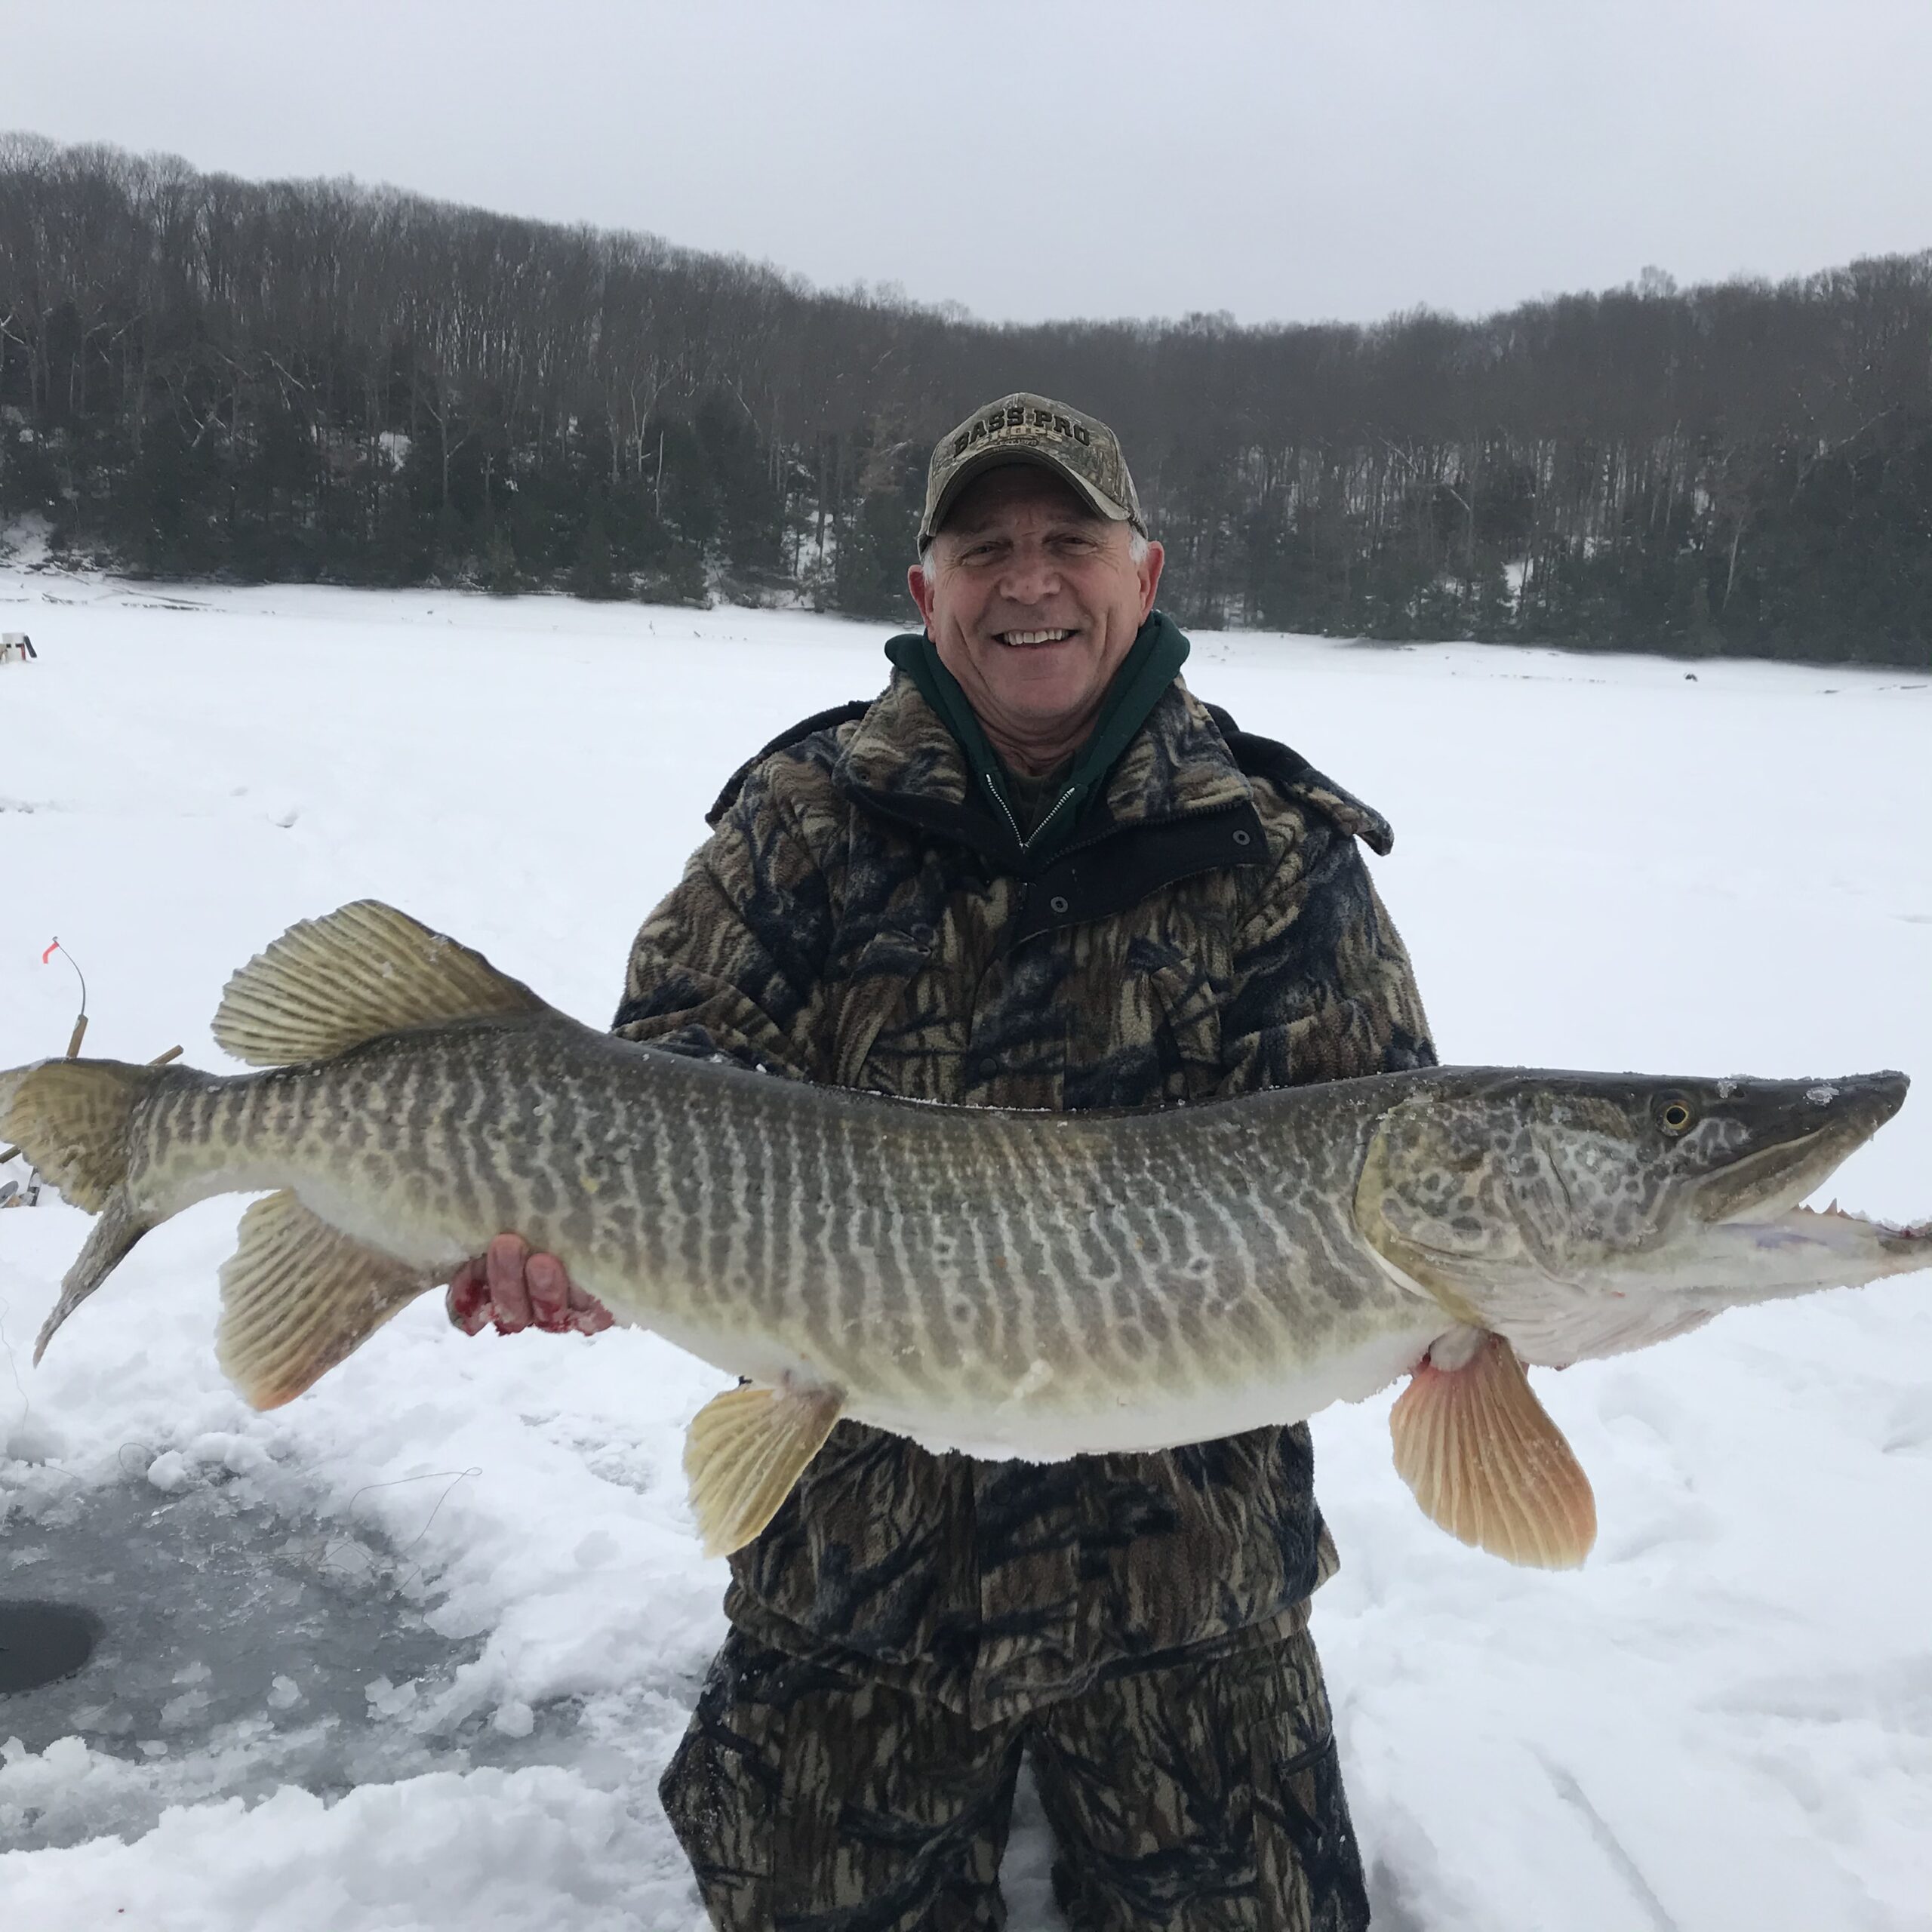 Ice Fisherman Catches a Surprise Tiger Muskie